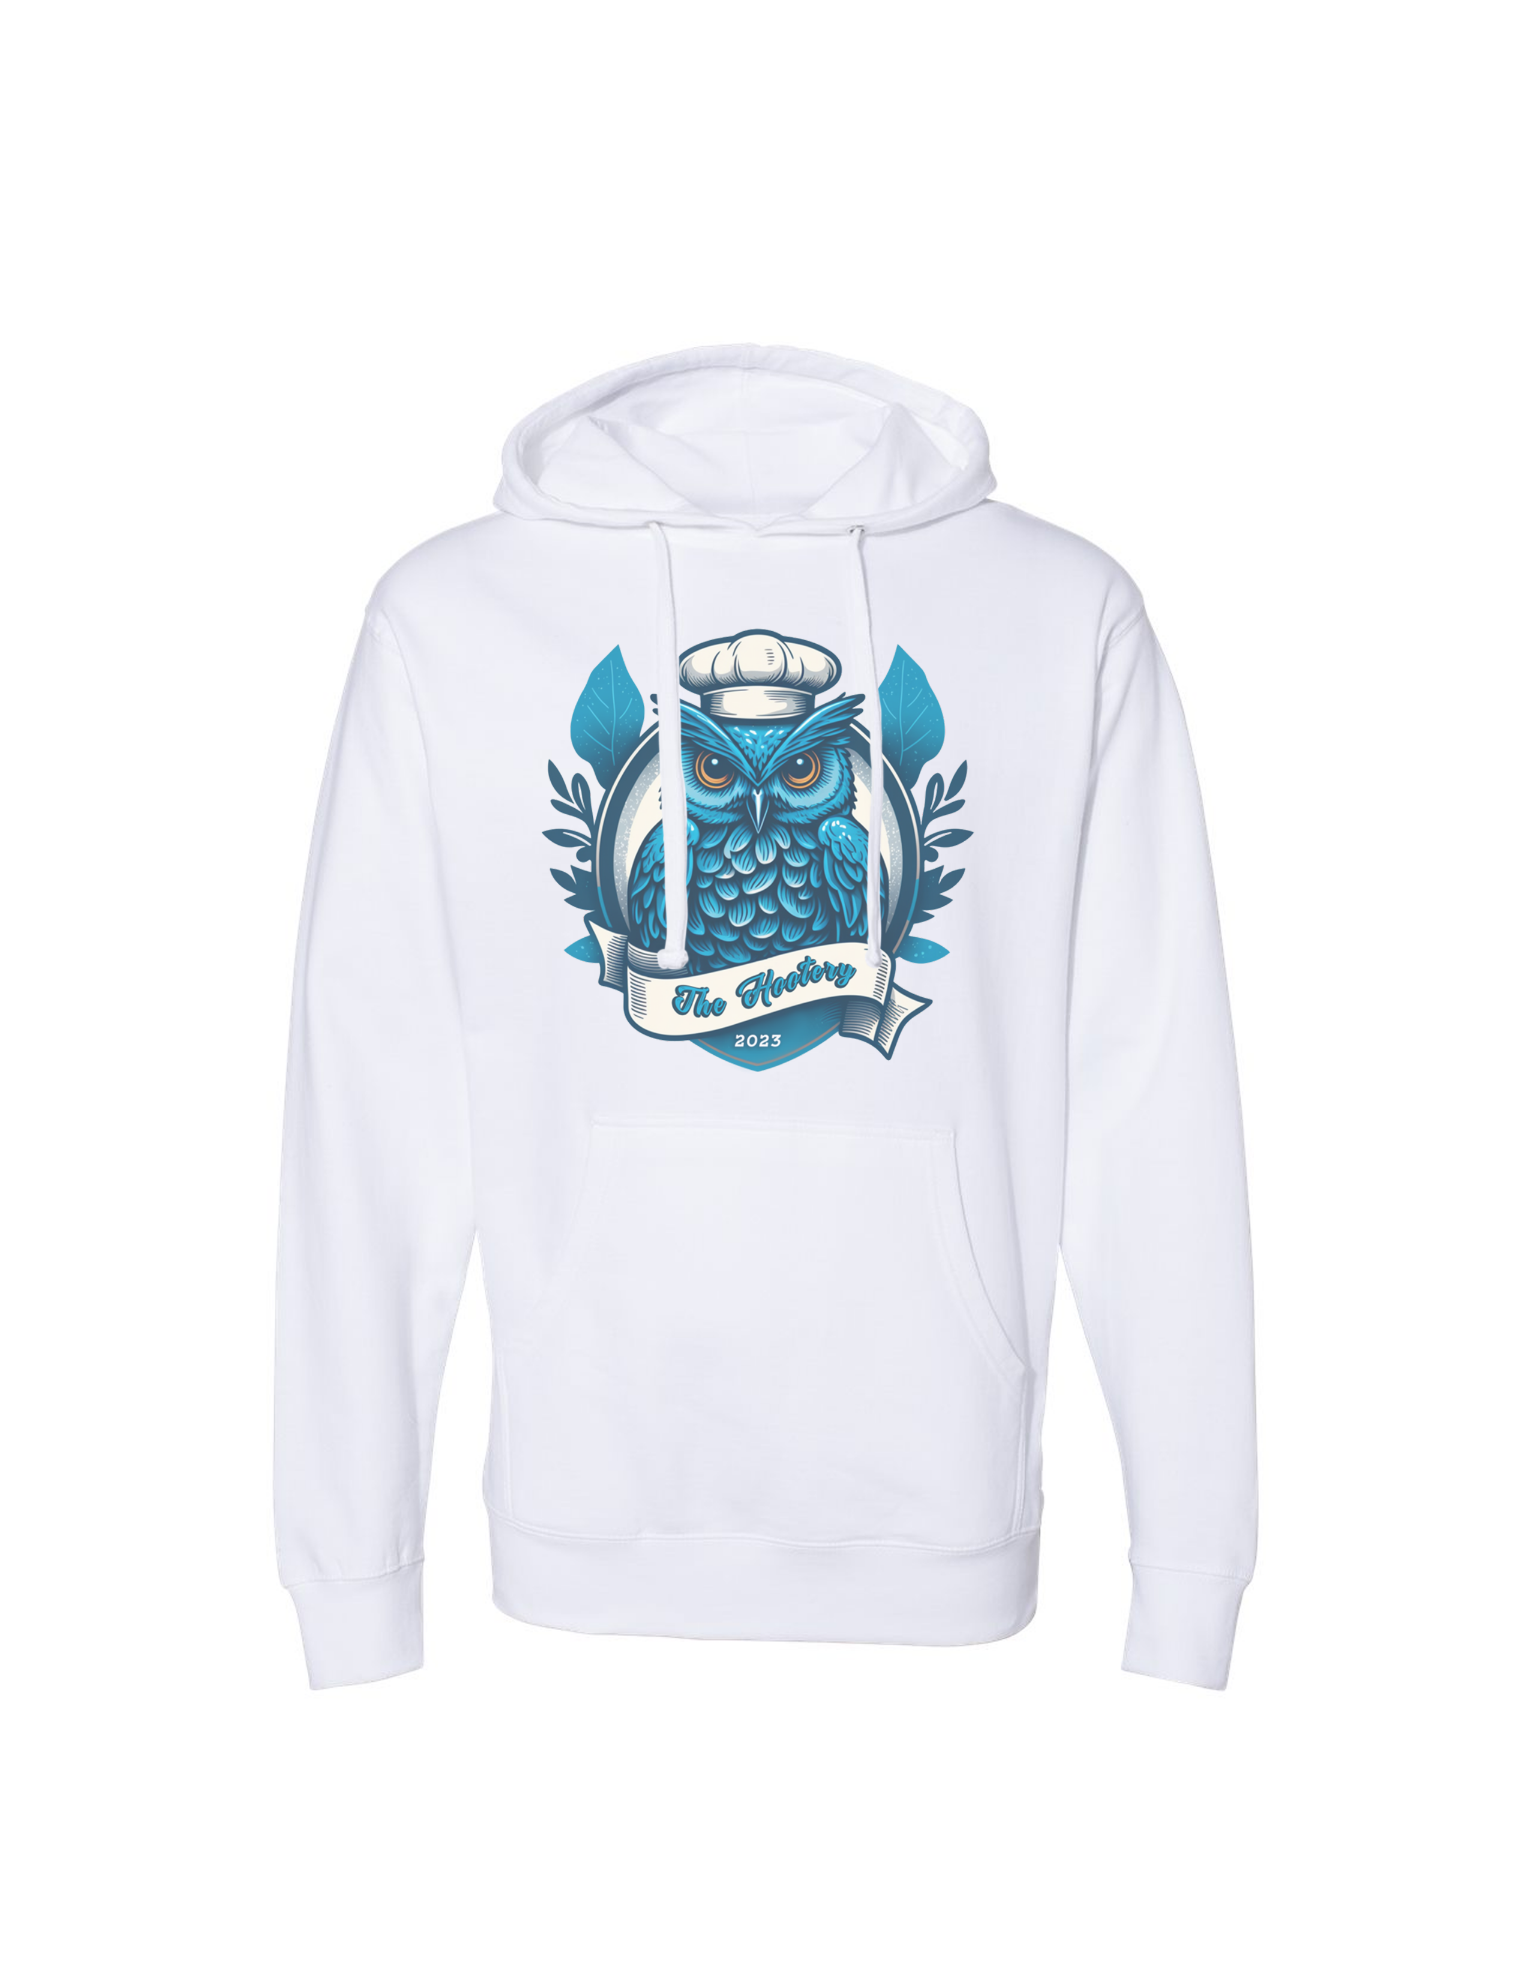 THE HOOTERY. STEVE THE OWL'S HOODIE (INDEPENDENT)